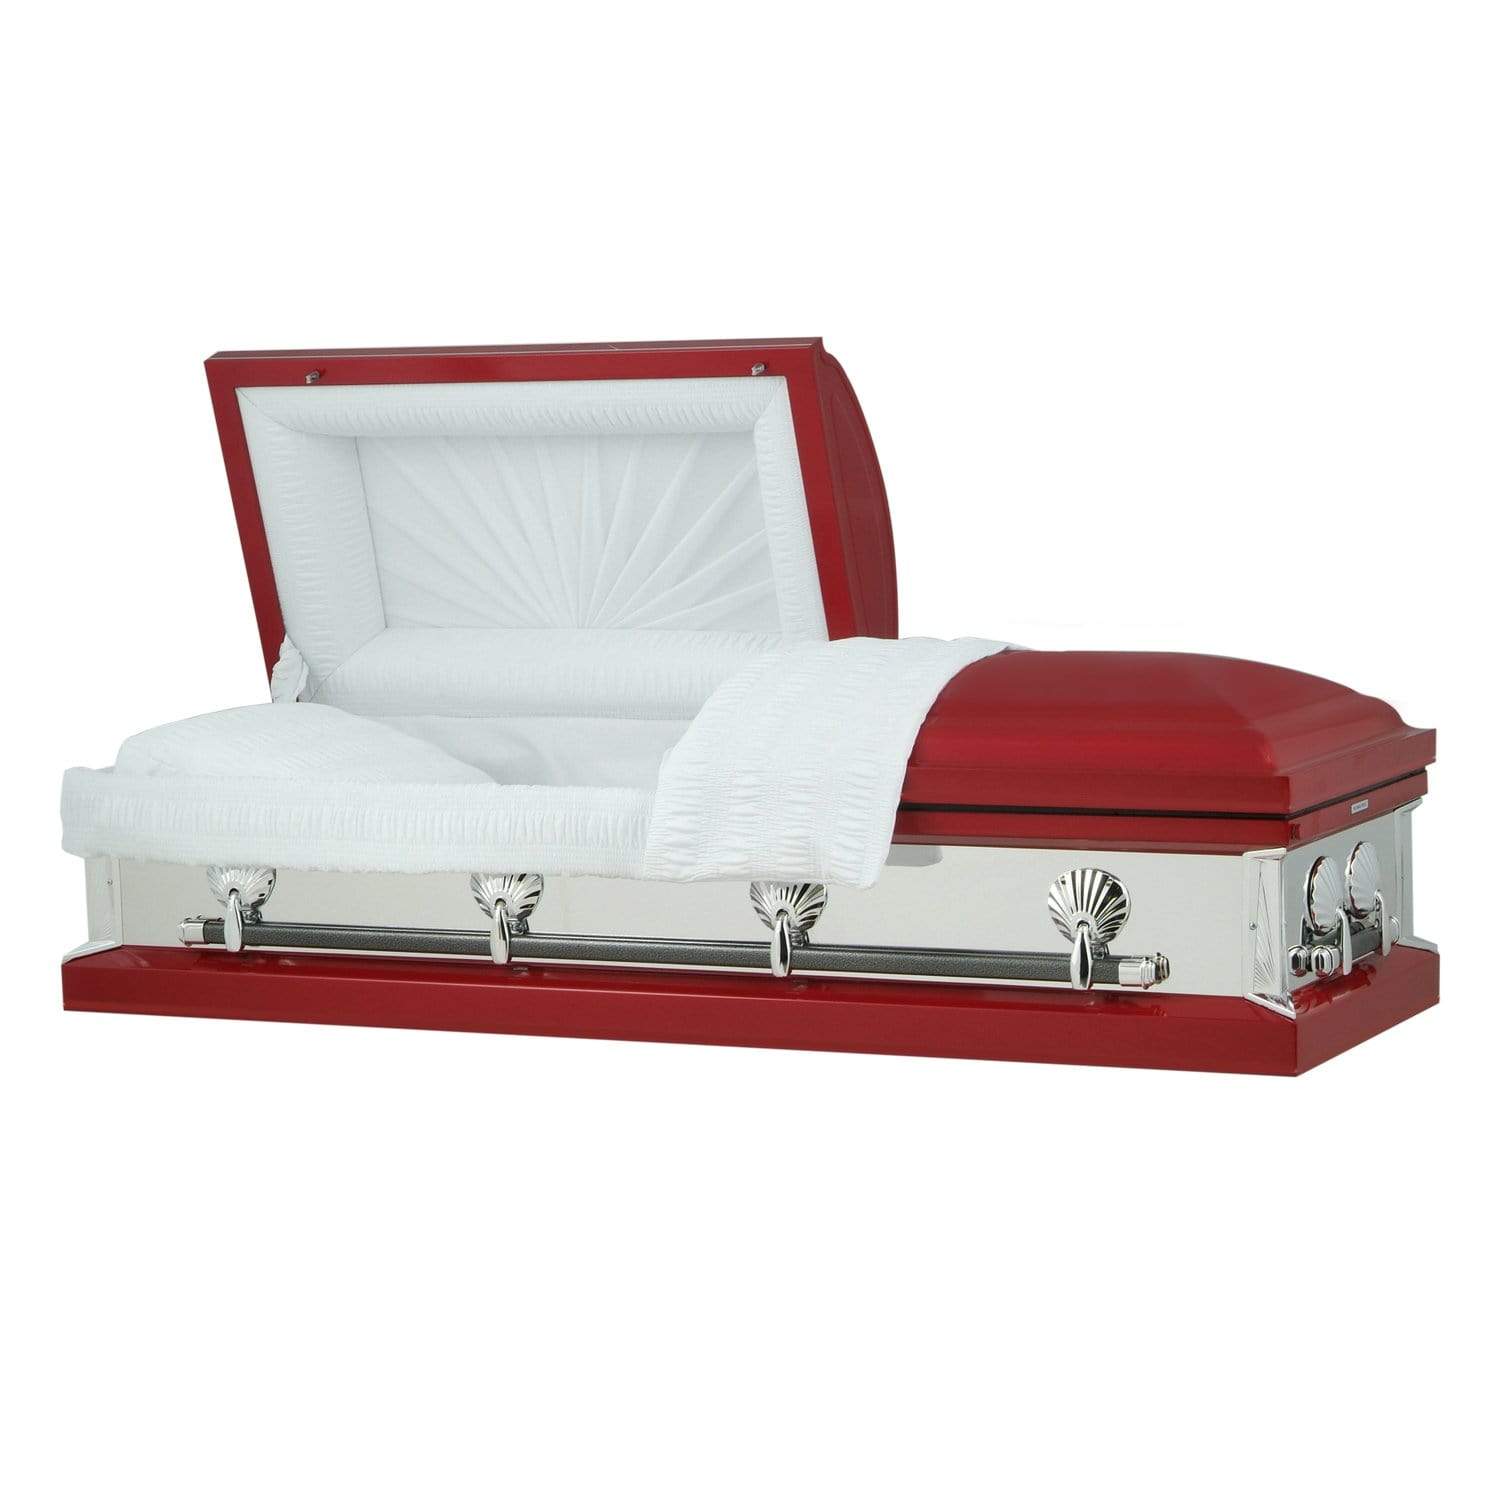 Reflections Series | Red Steel Casket with White Interior - Titan Casket